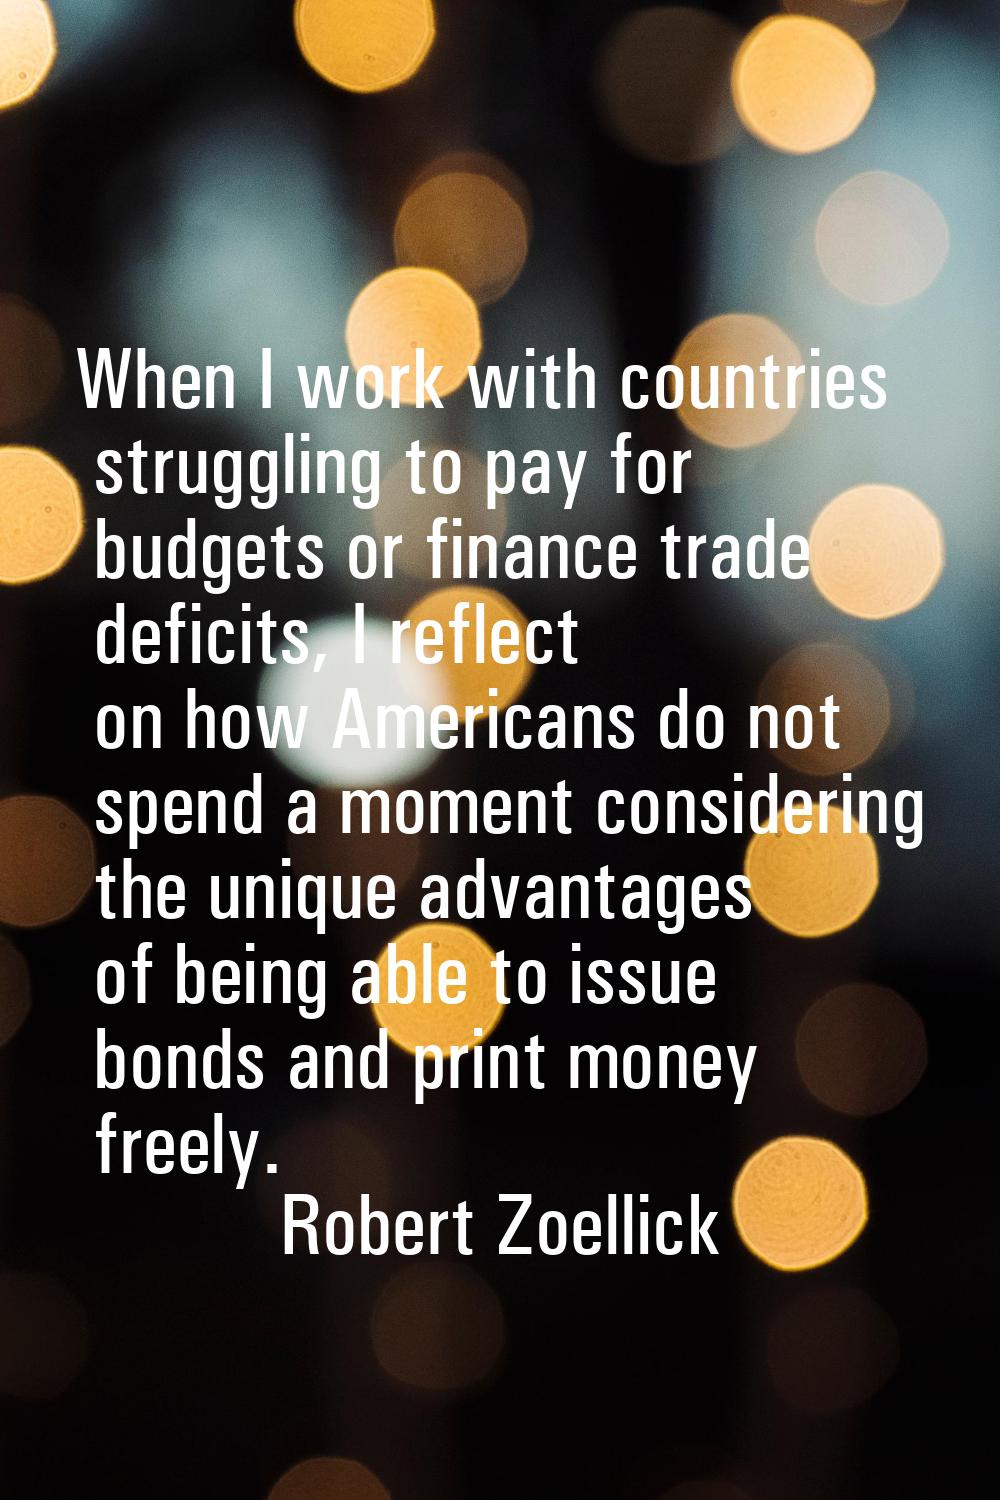 When I work with countries struggling to pay for budgets or finance trade deficits, I reflect on ho